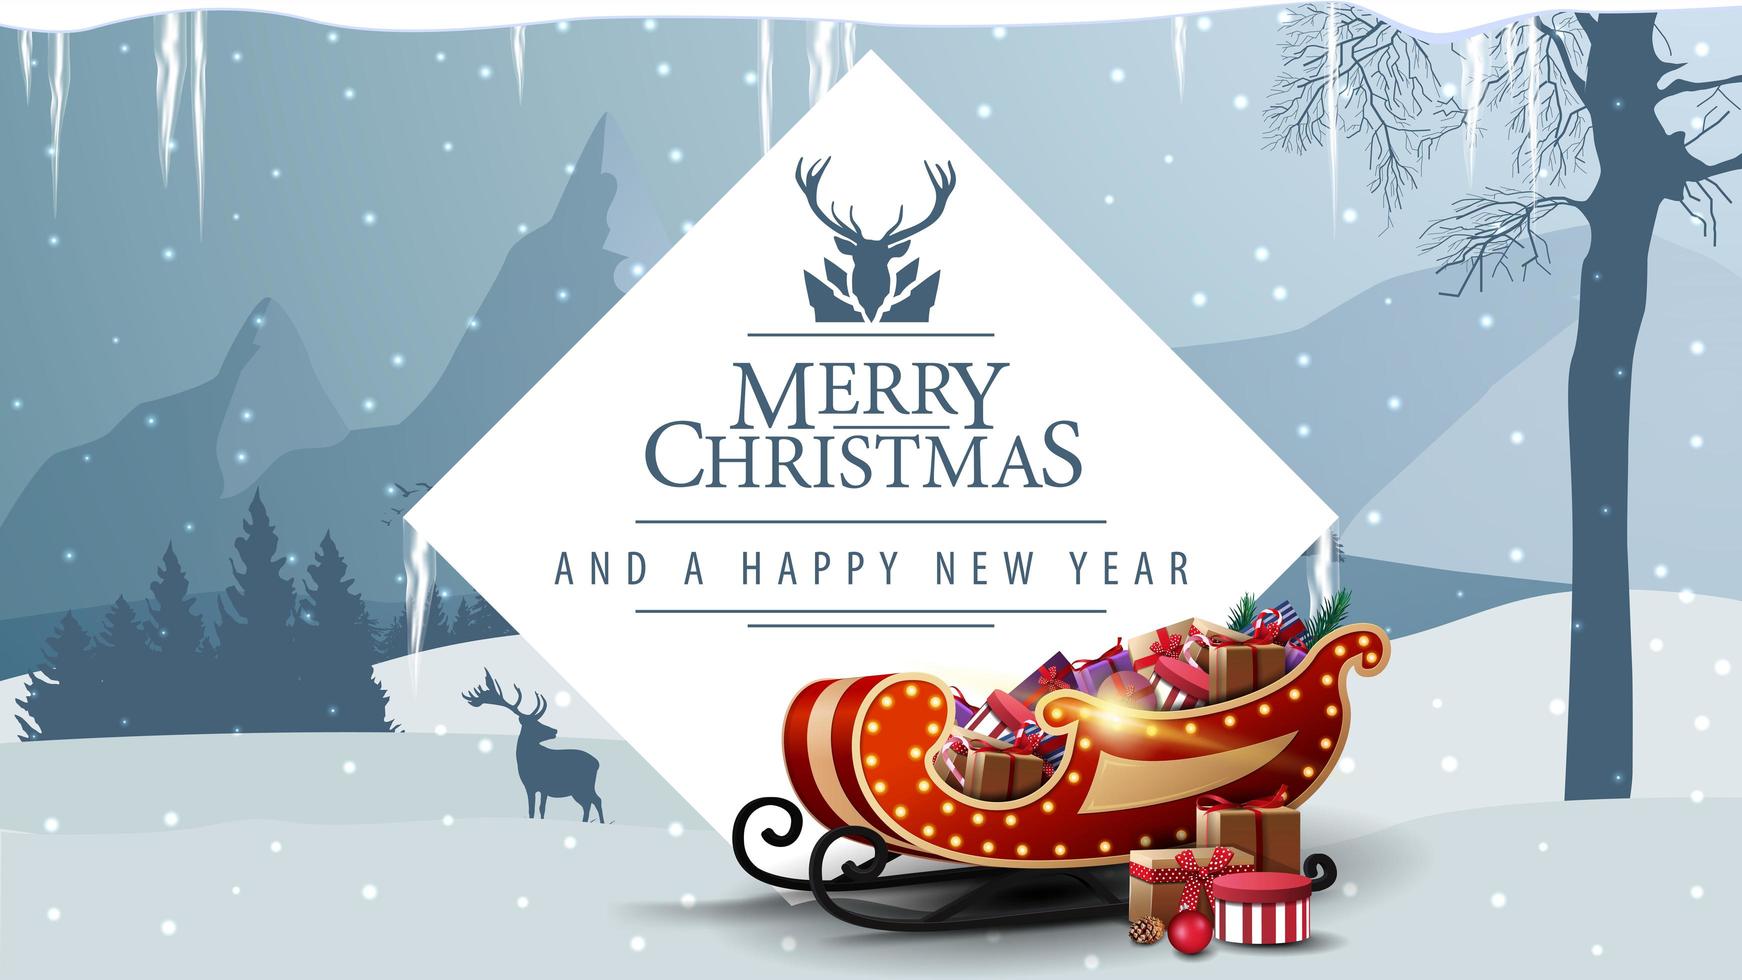 Merry Christmas and Happy New Year postcard vector